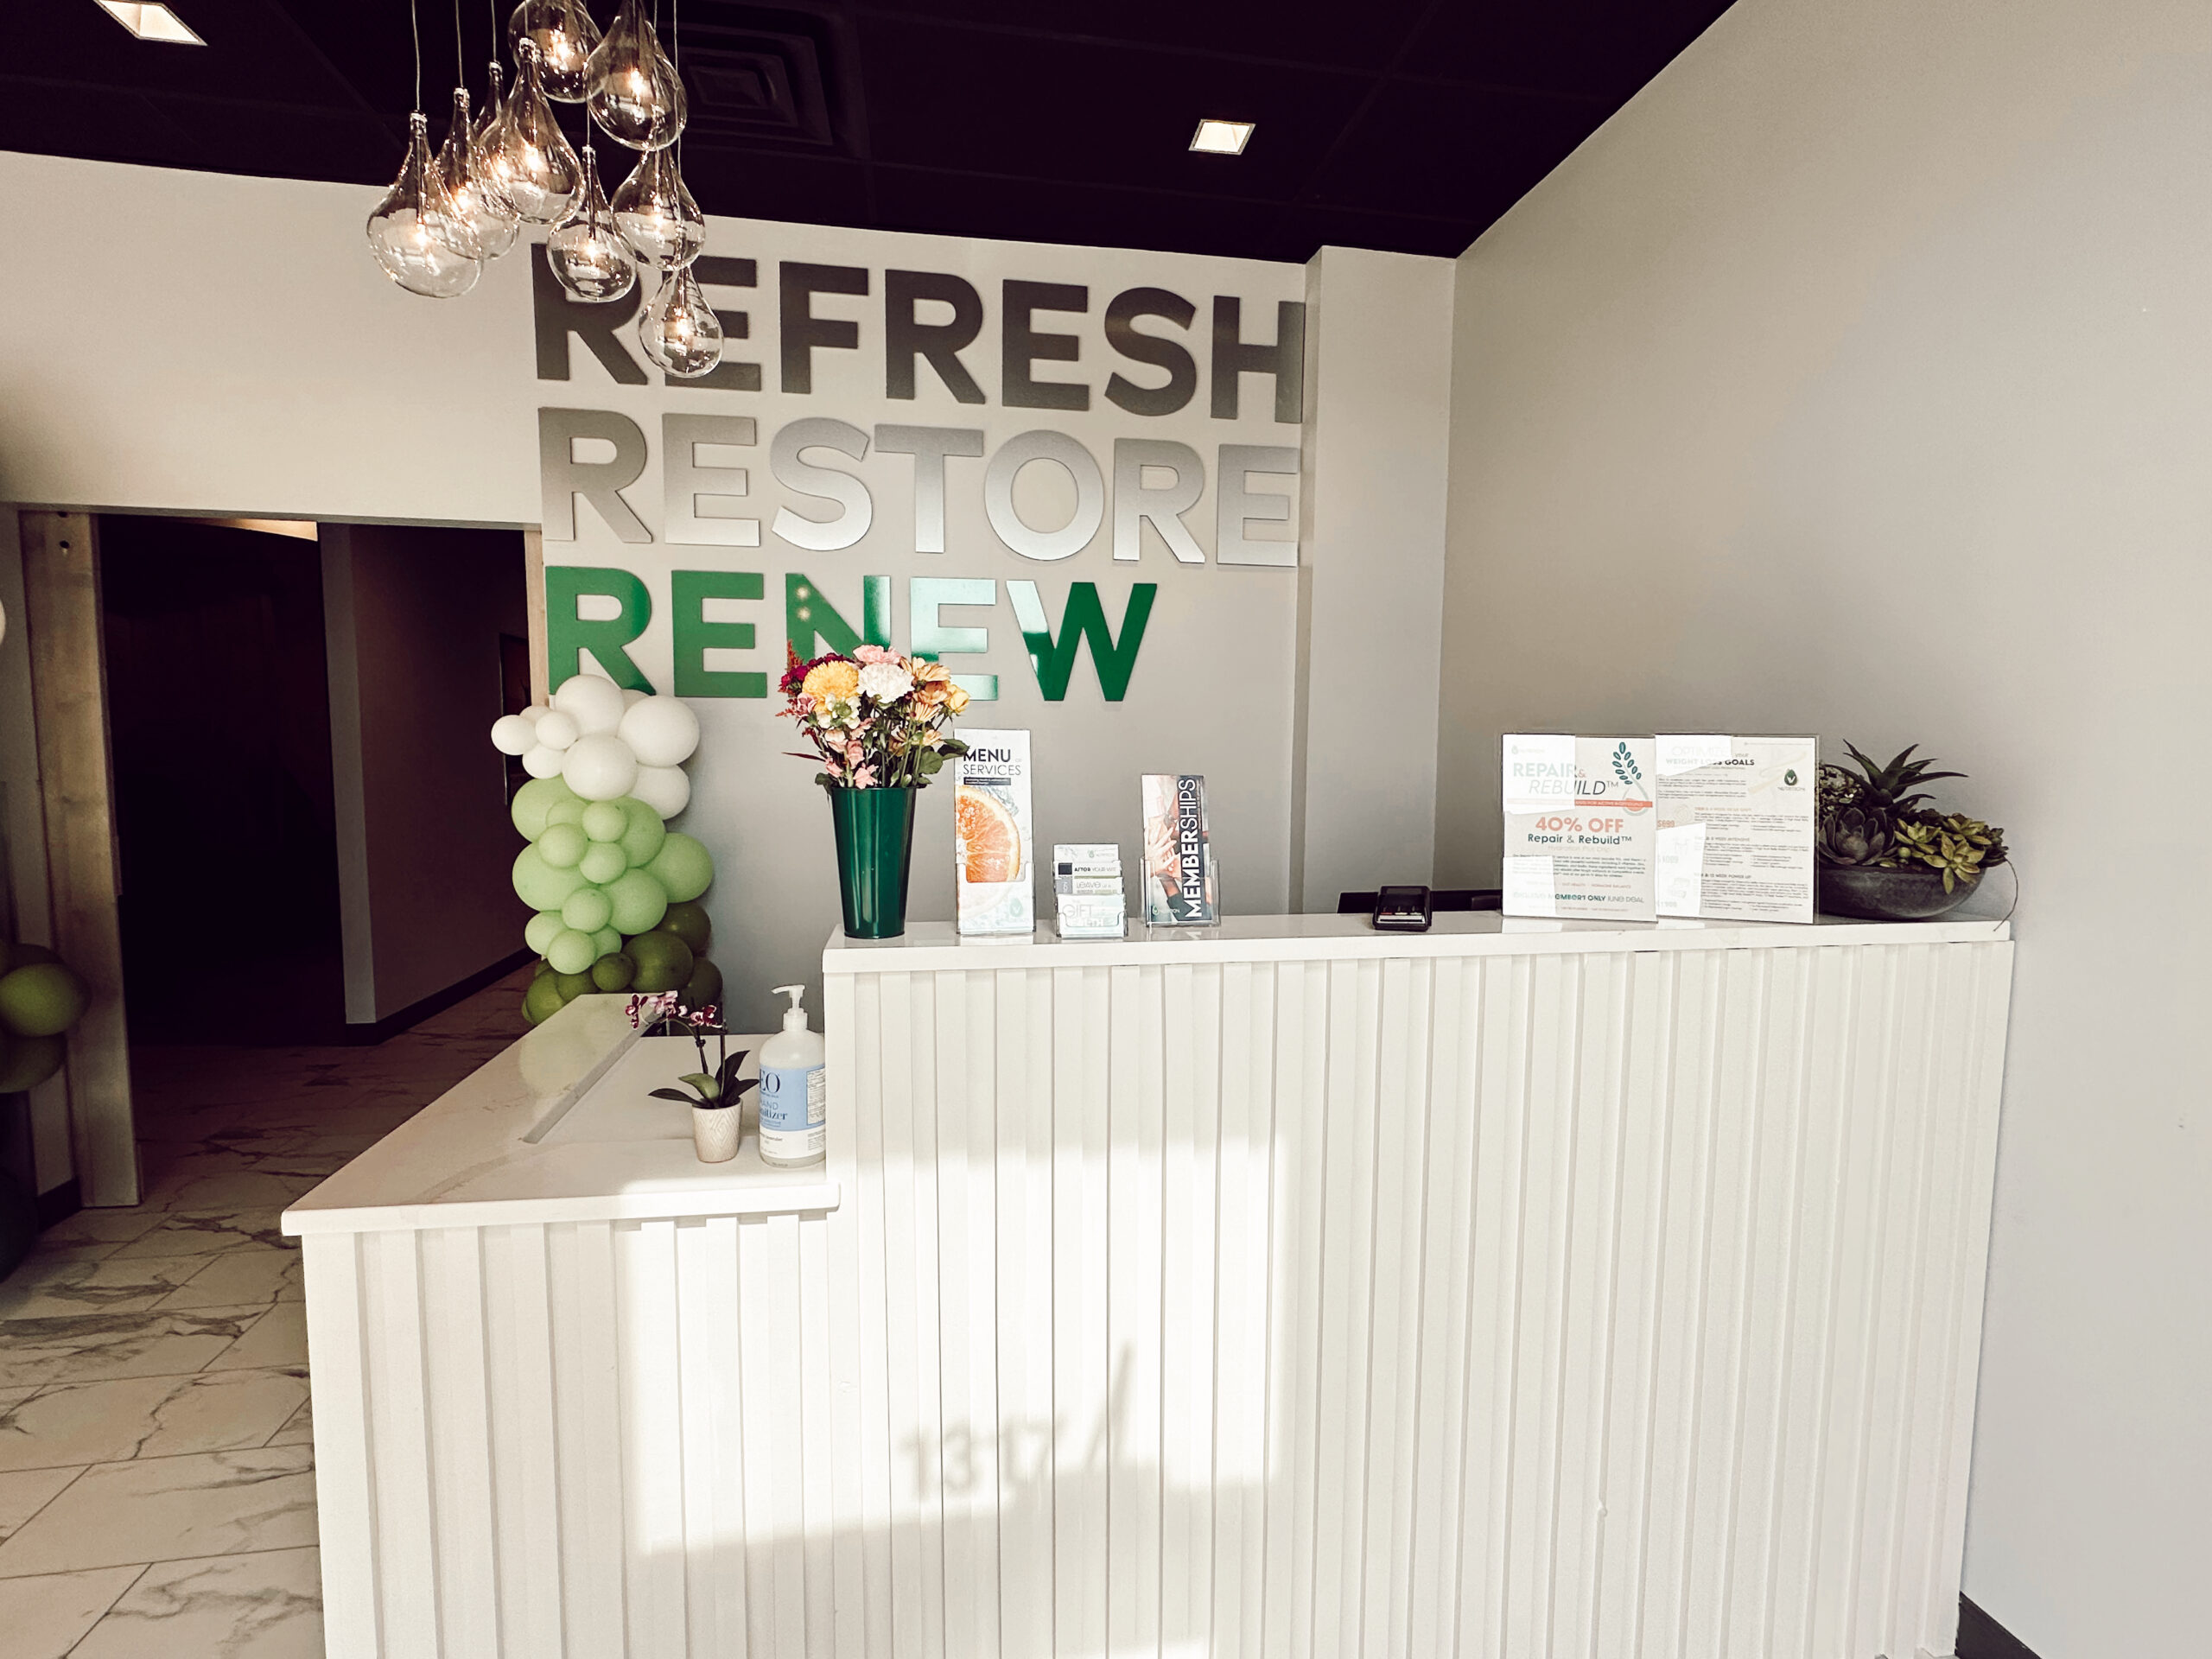 A reception area with a sign that says refresh restore renew, offering drip hydration and blood testing services.